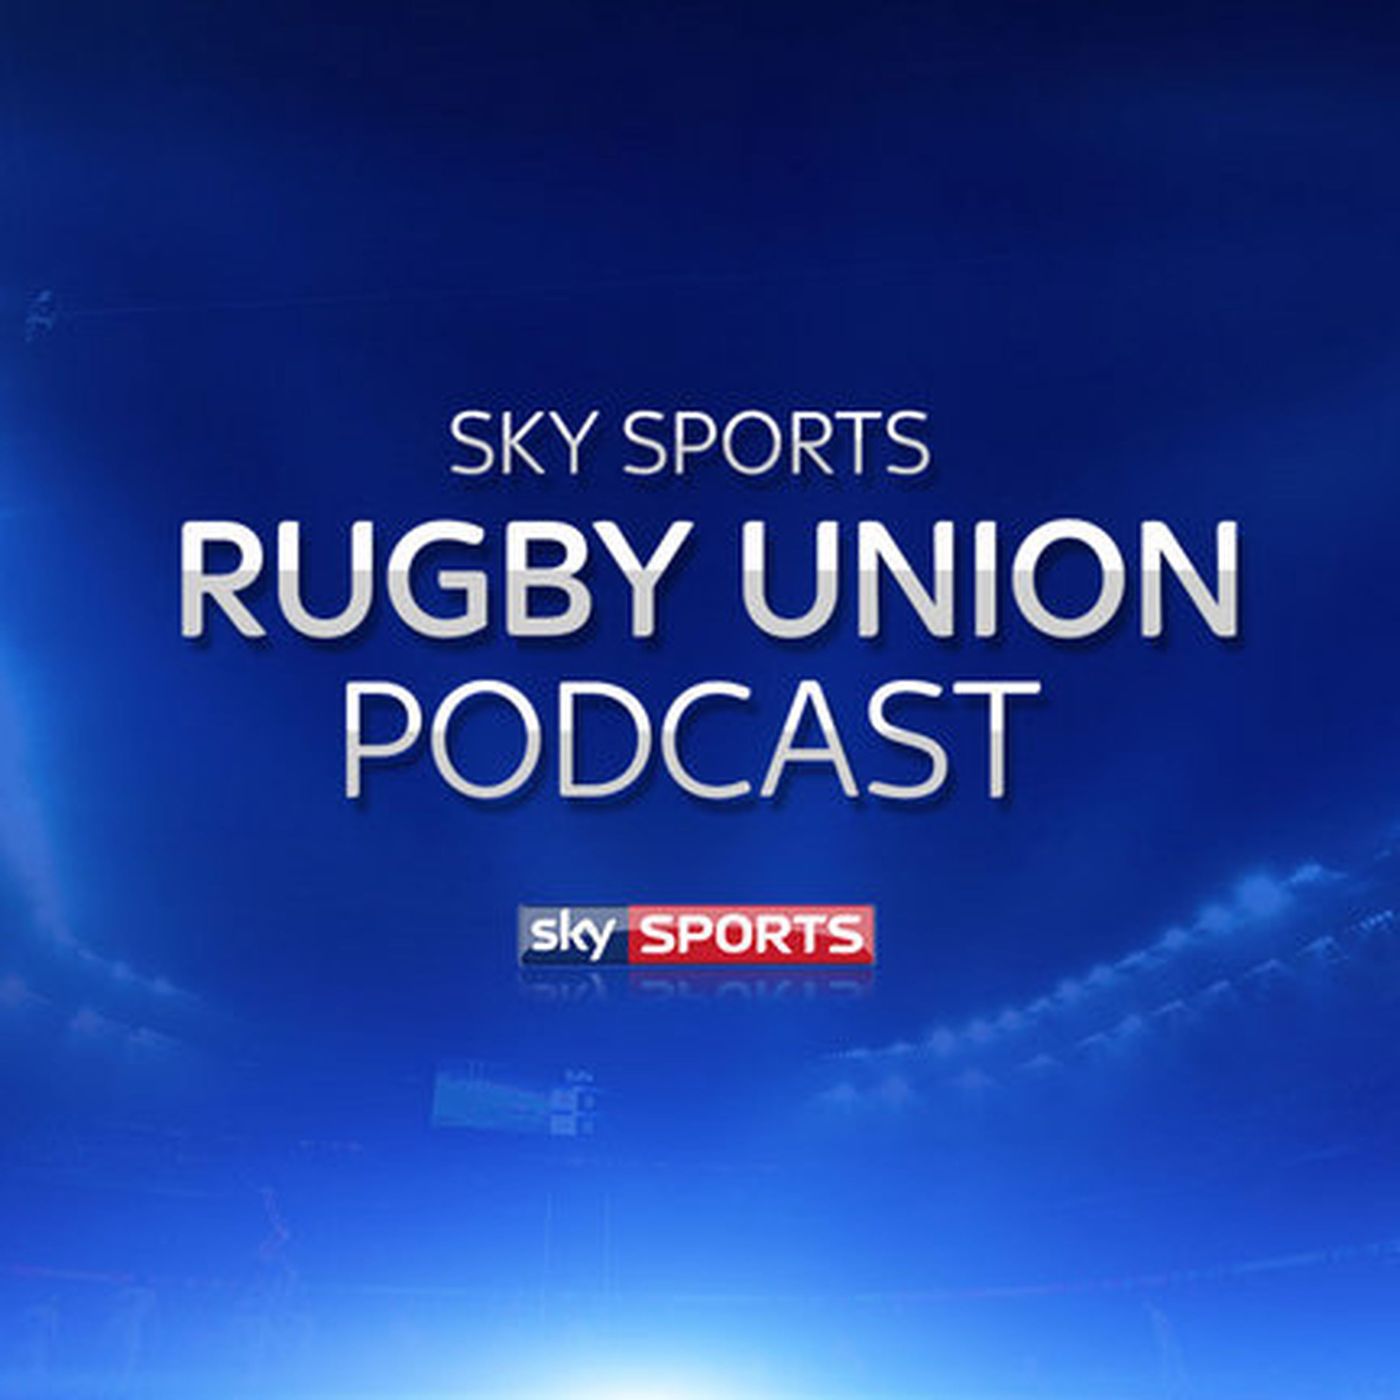 Sky Sports Rugby Union Podcast - 10th February